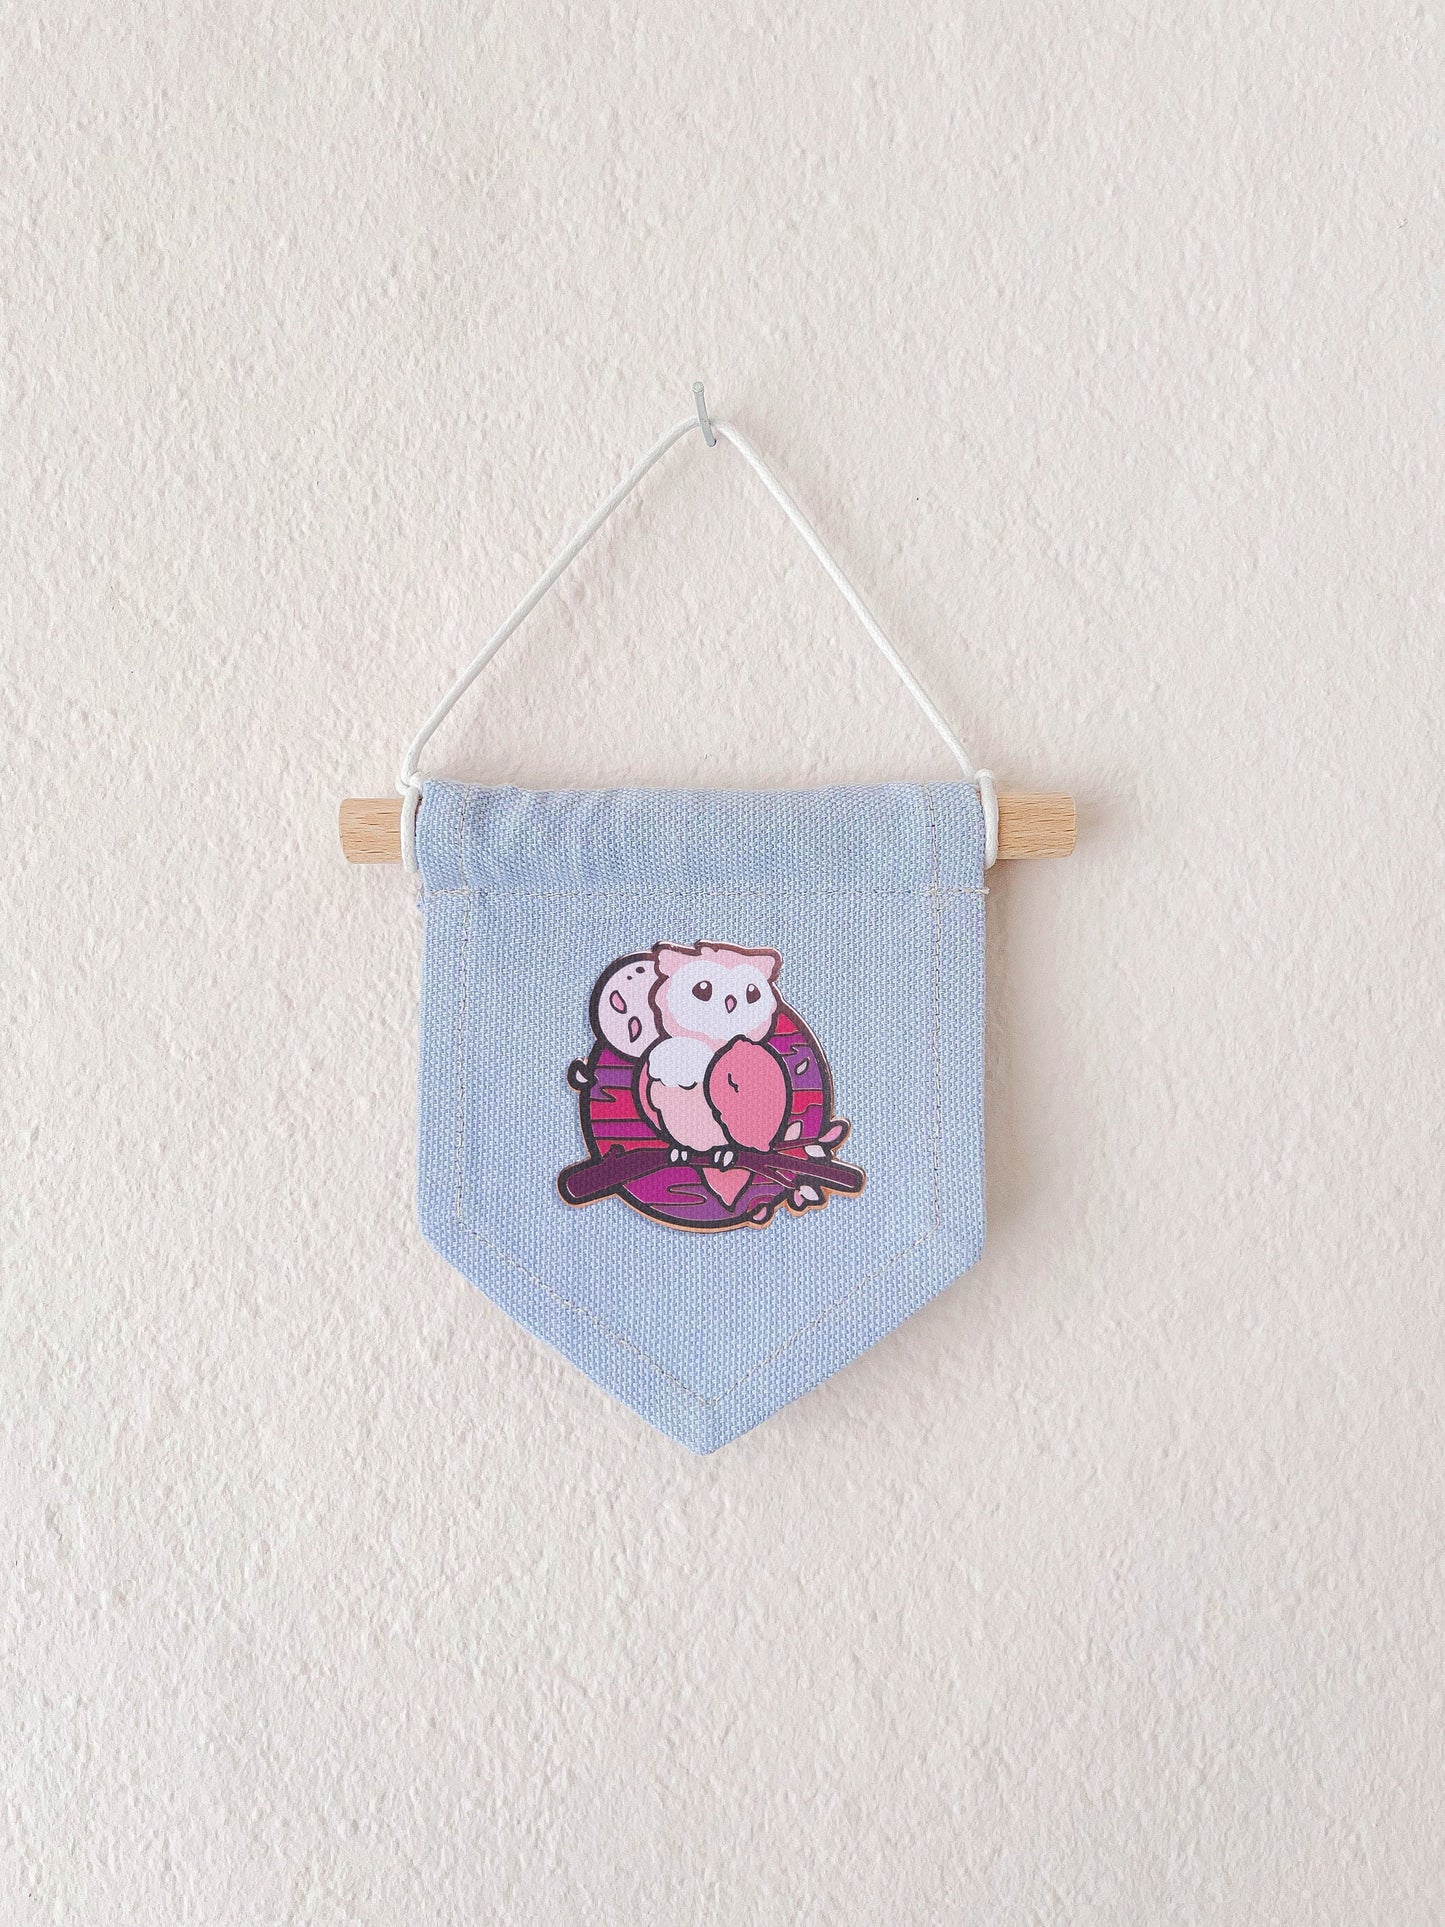 Cute Cotton Pin Banner | S 12cm x 10cm | Handmade in Germany | Baby Blue Canvas Fabric | Classic Pin Display